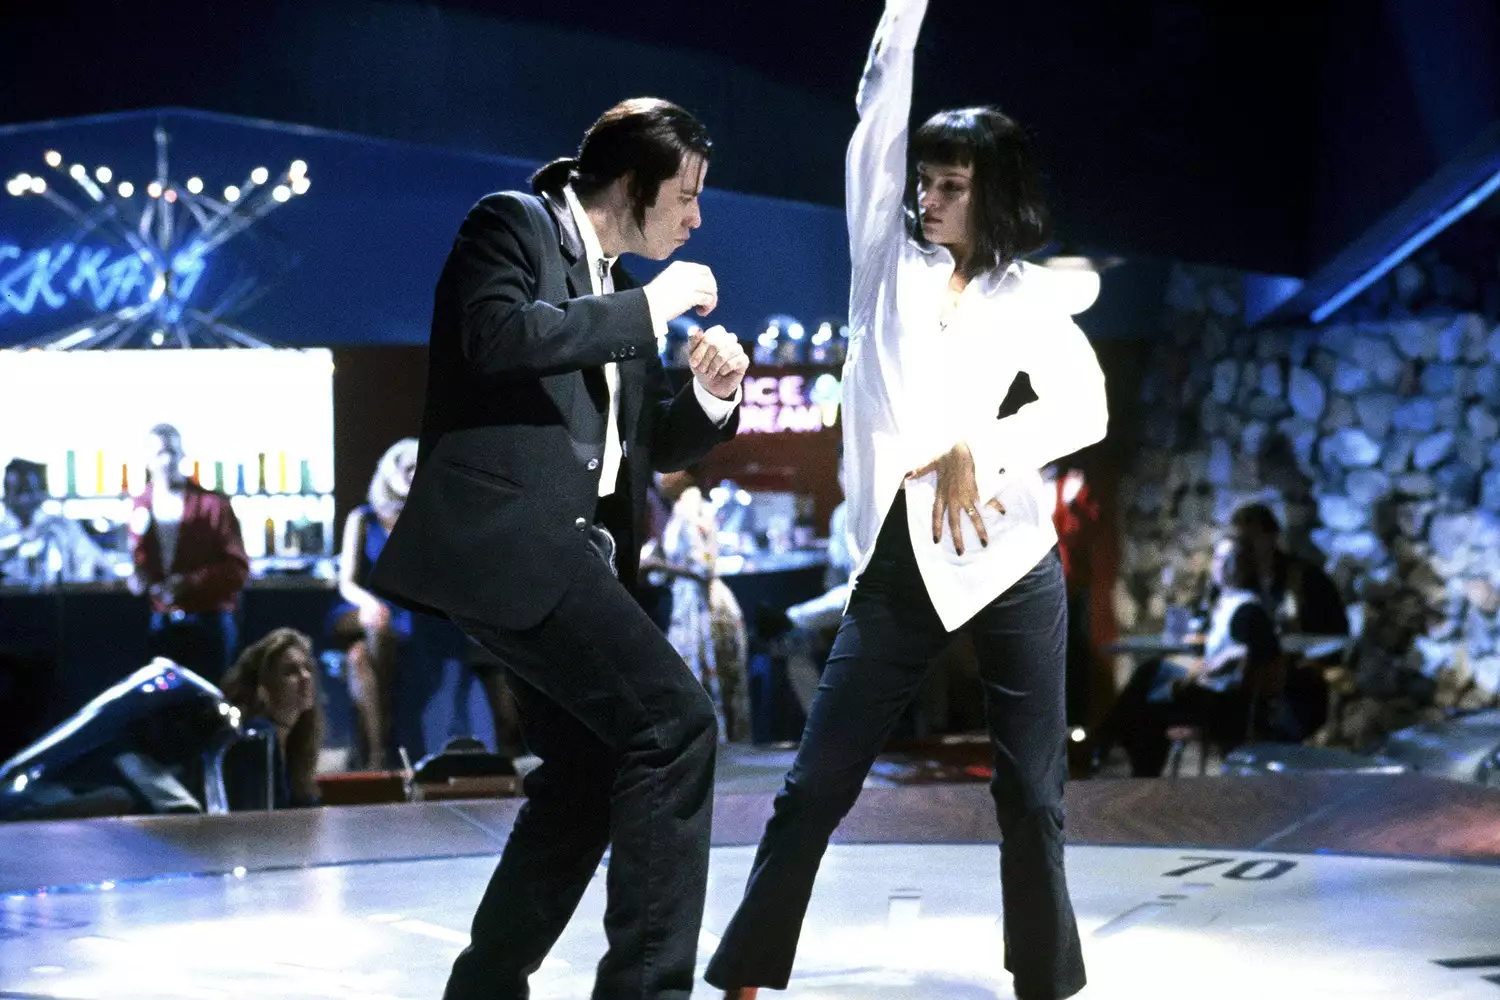 John Travolta describes Pulp Fiction's 30th anniversary reunion as a truly cosmic event of epic proportions